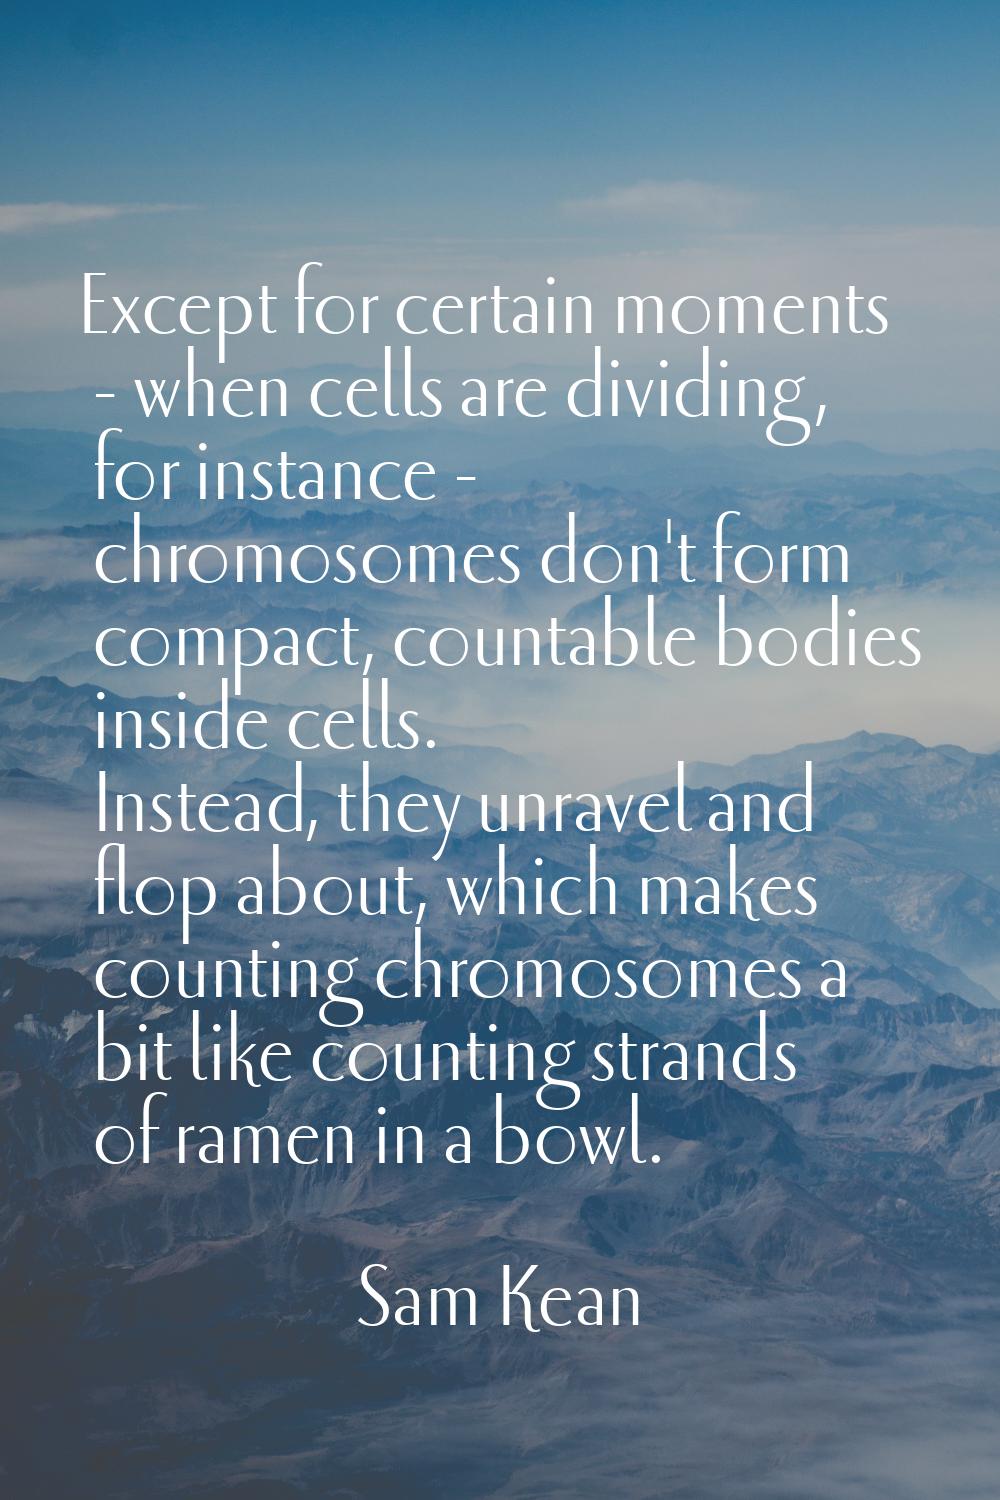 Except for certain moments - when cells are dividing, for instance - chromosomes don't form compact